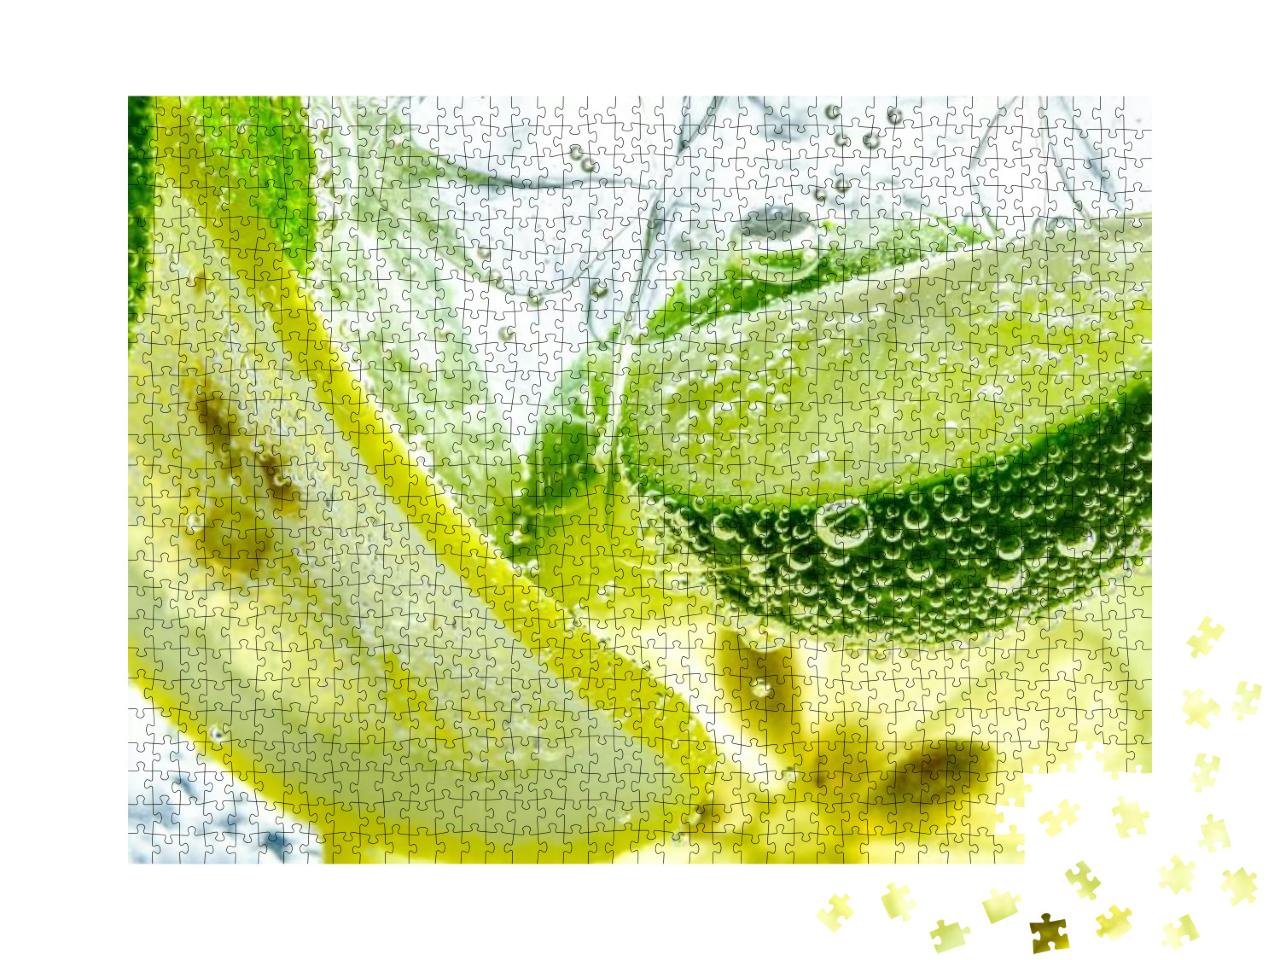 Lemon Slice Drop in Fizzy Sparkling Water, Juice Refreshm... Jigsaw Puzzle with 1000 pieces